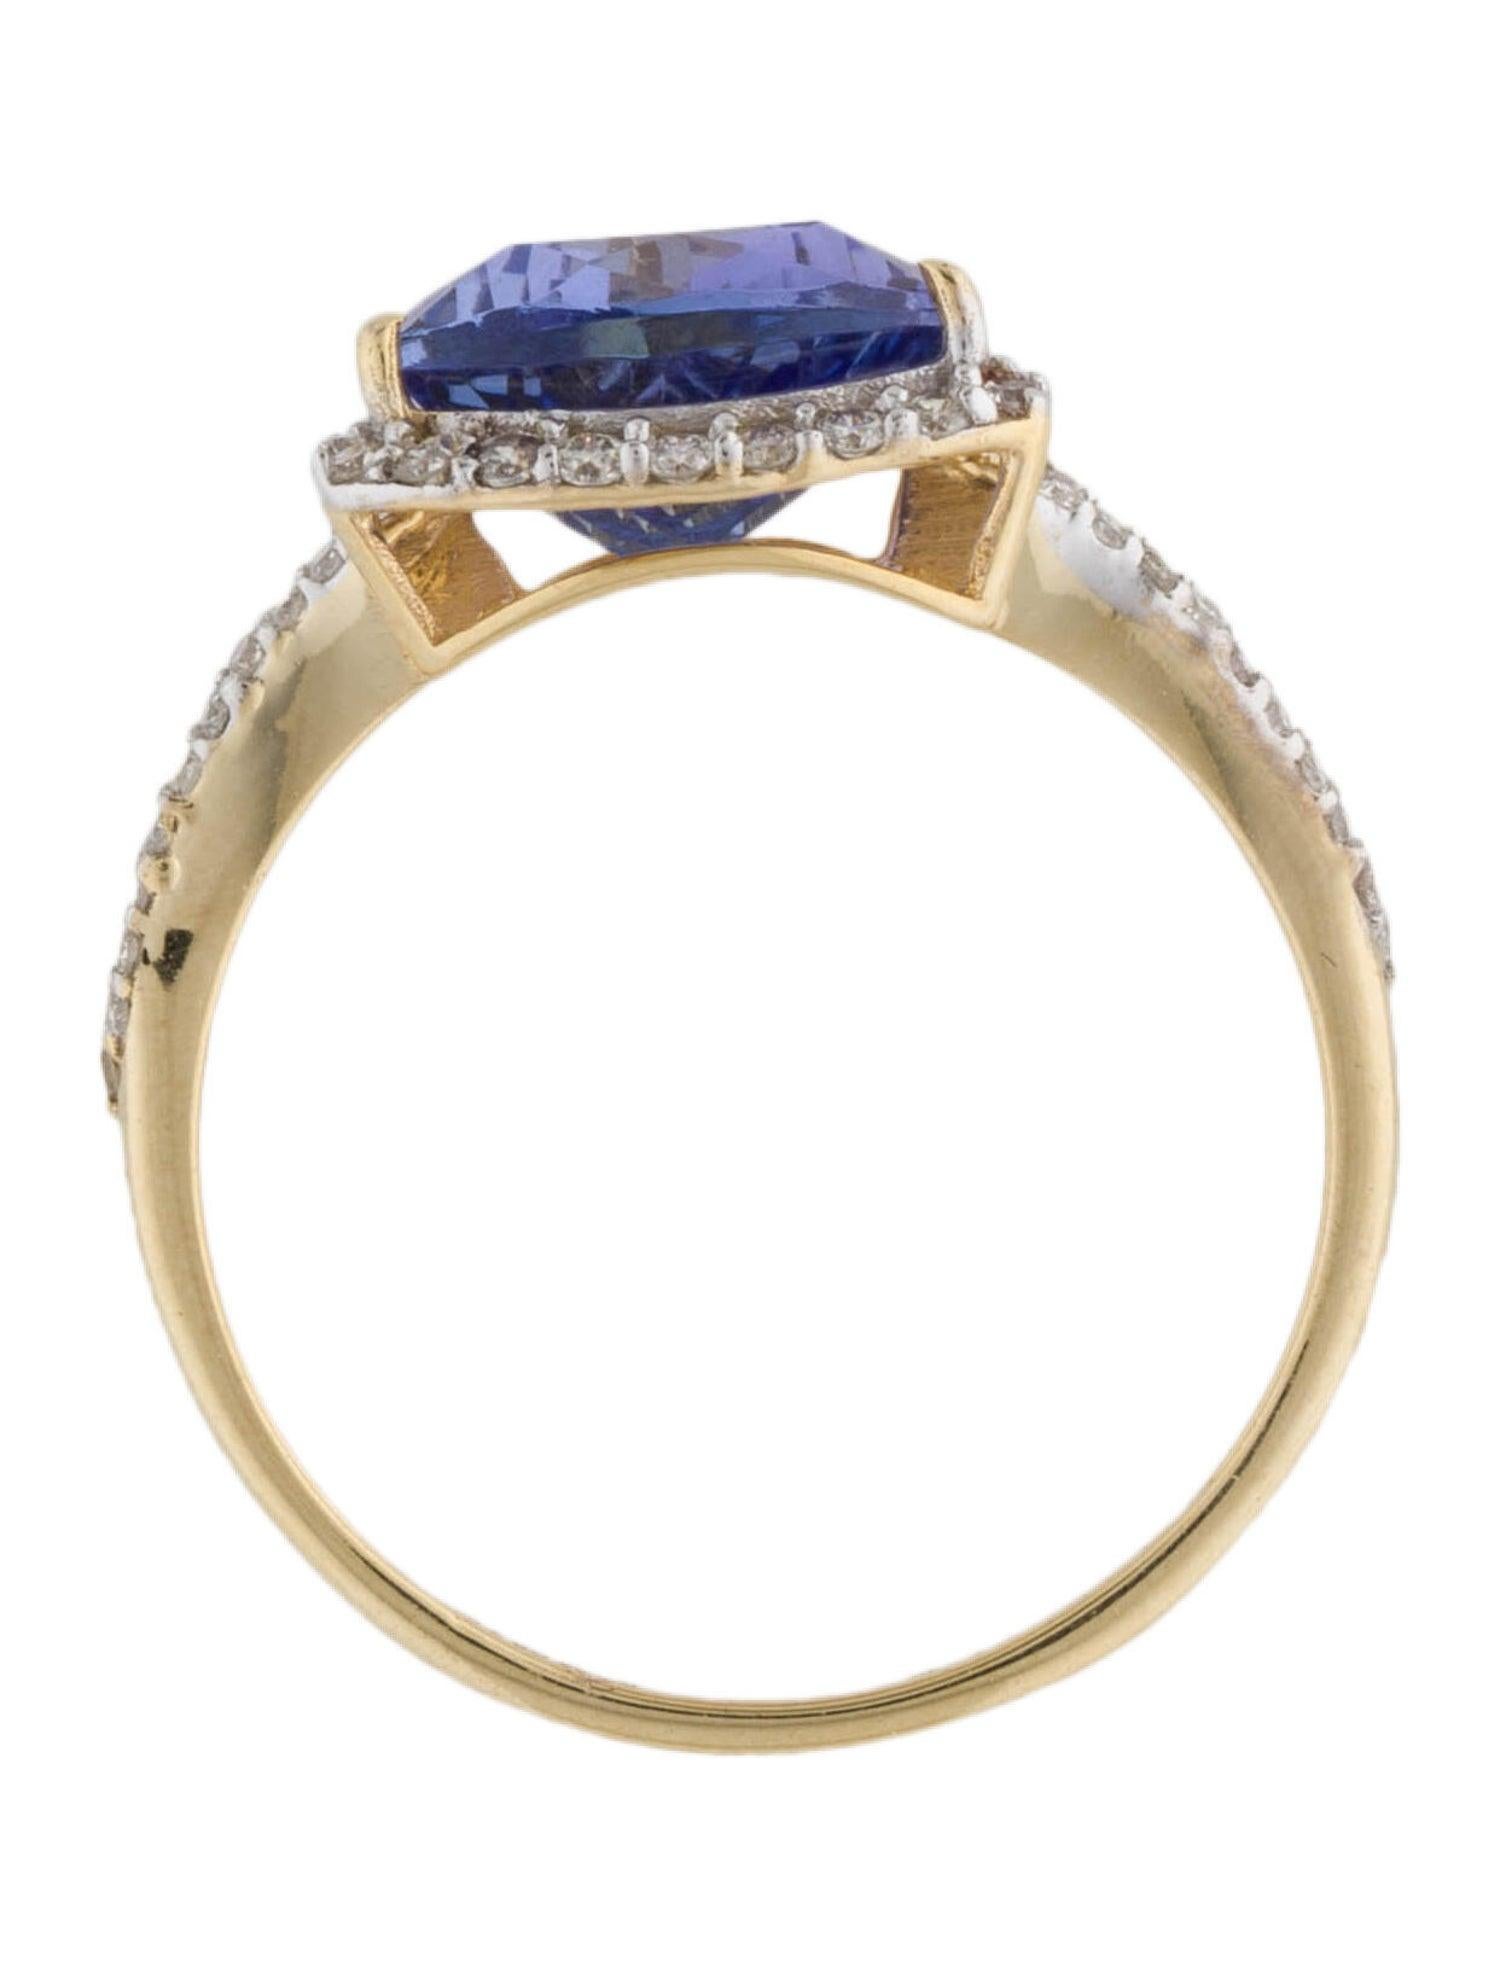 Luxurious 14K Tanzanite & Diamond Cocktail Ring, Size 7.25 - Statement Jewelry In New Condition For Sale In Holtsville, NY